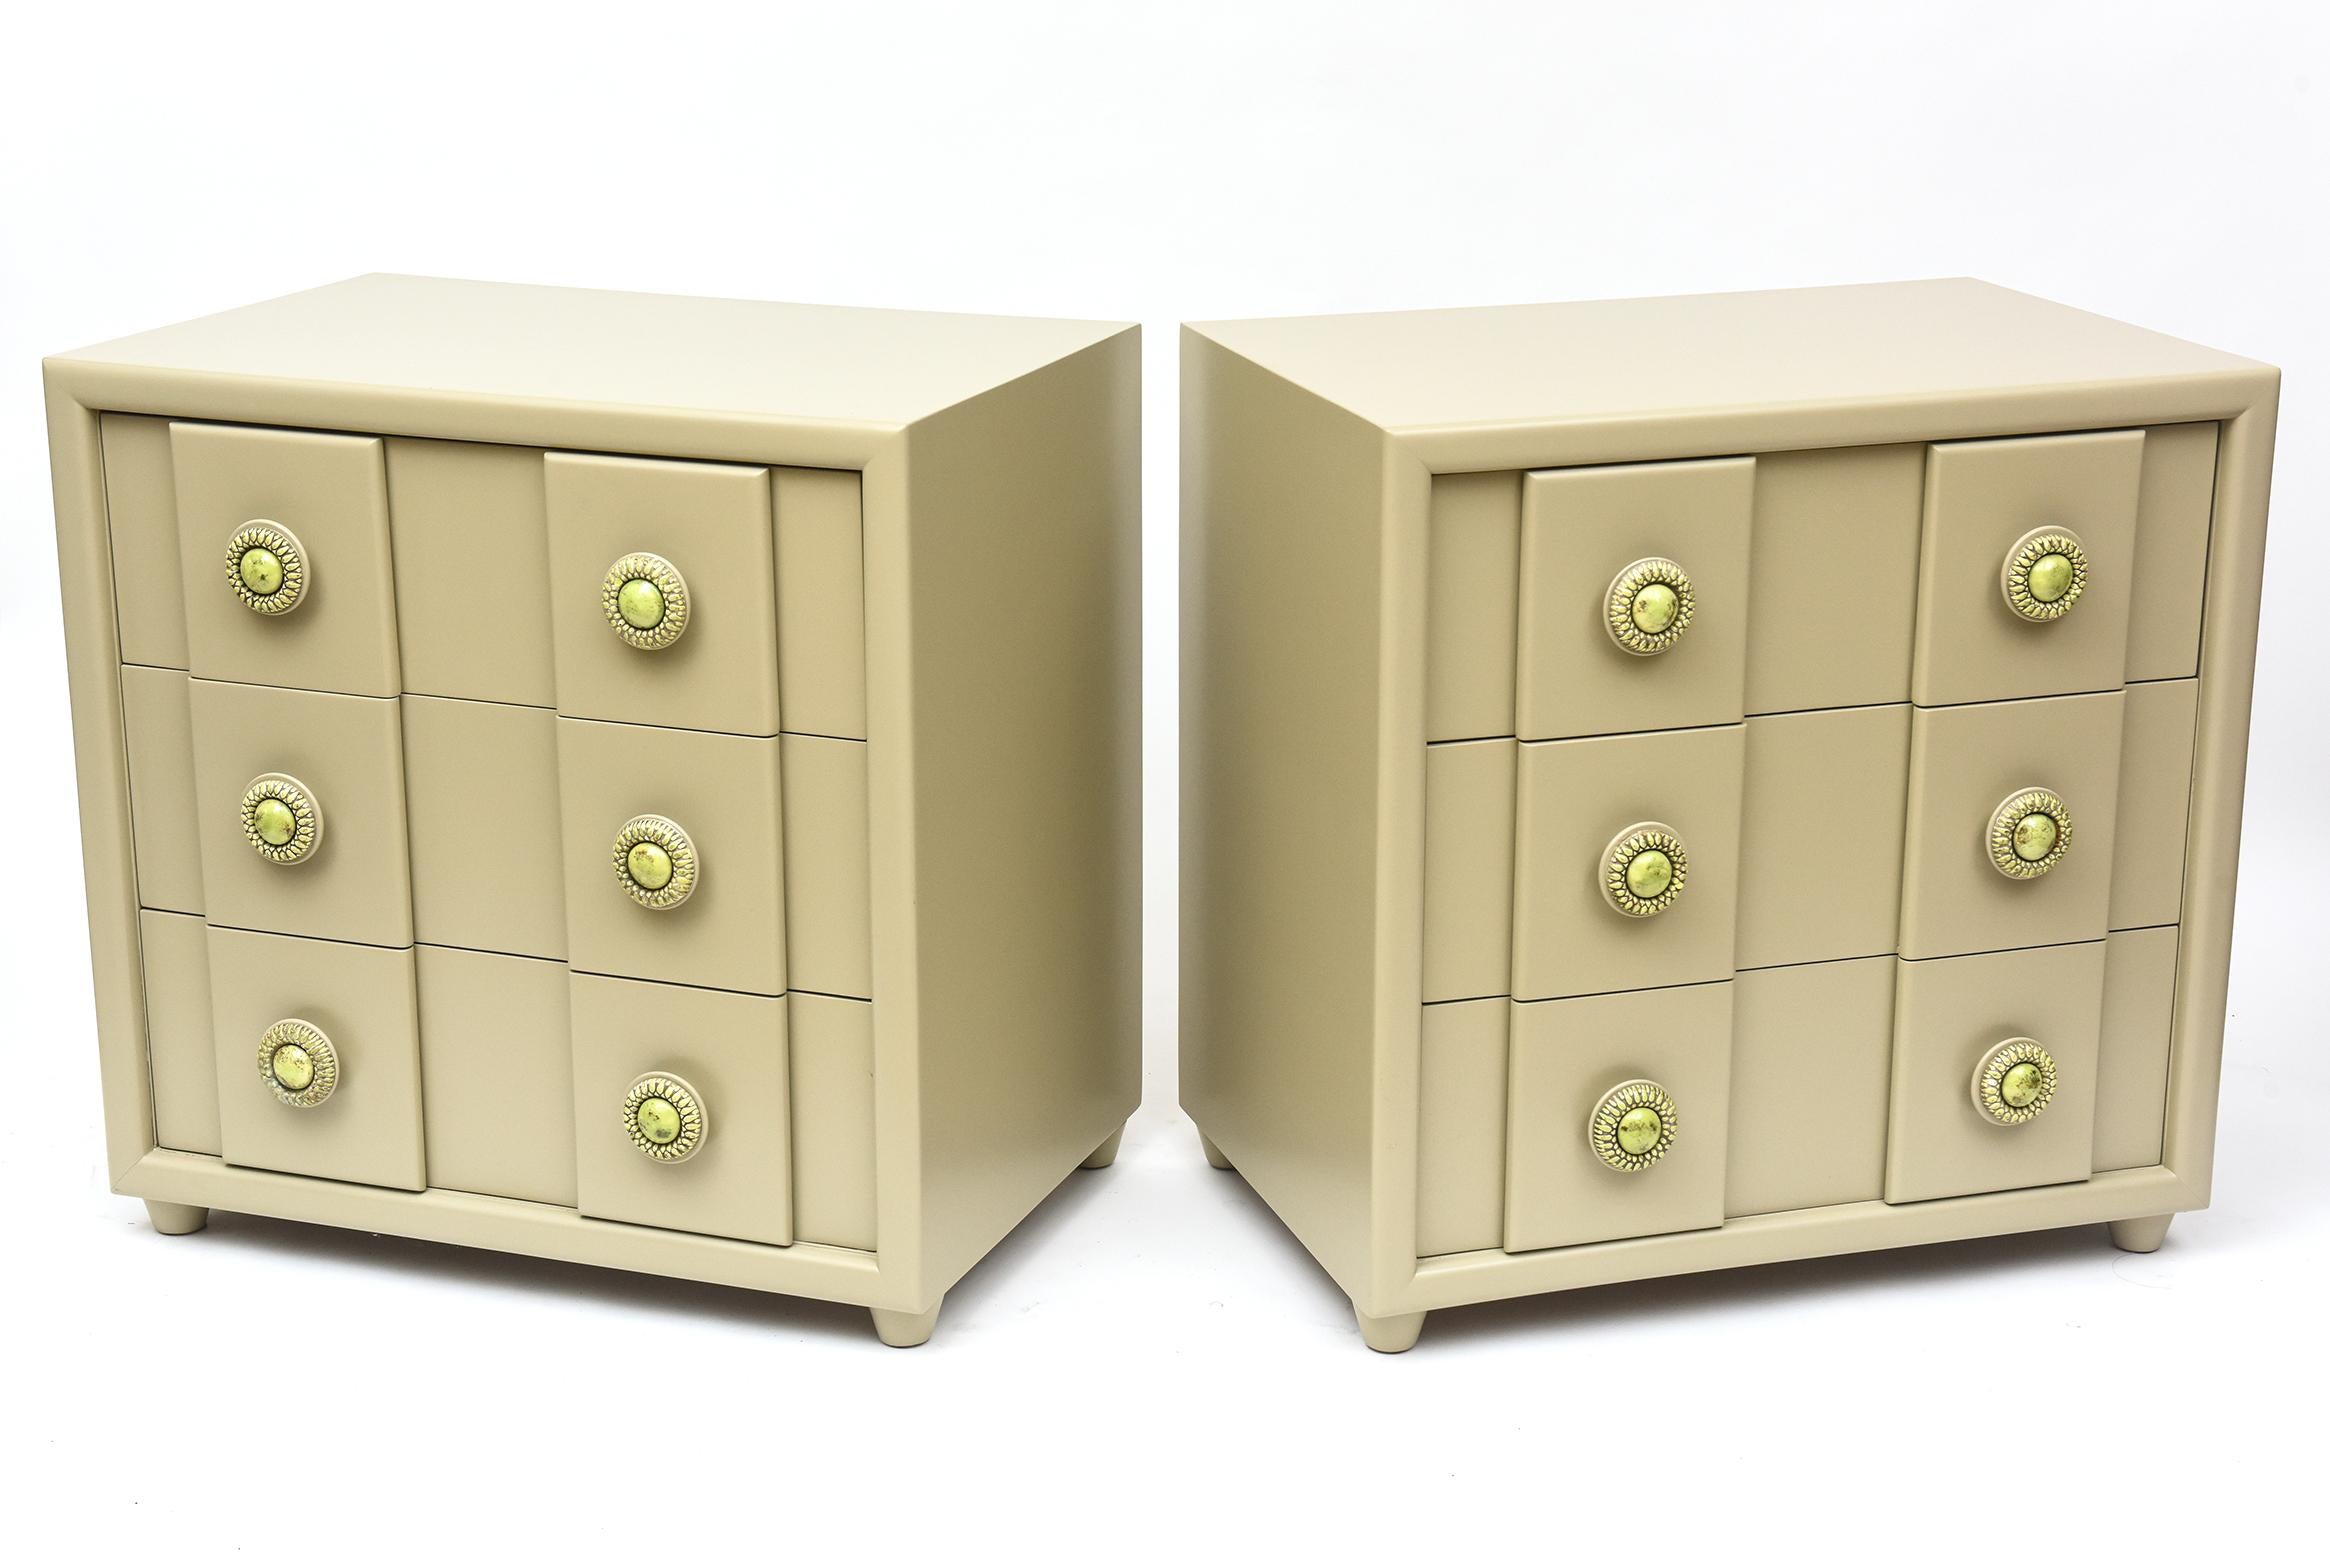 Charming circa 1940s Streamlined Moderne bachelor chests by Karpen Furniture Co. are refinished in softest olive to highlight their all-original floriate ceramic drawer knobs in vivid apple green. Founded in 1880, the Chicago-based Karpen Guaranteed